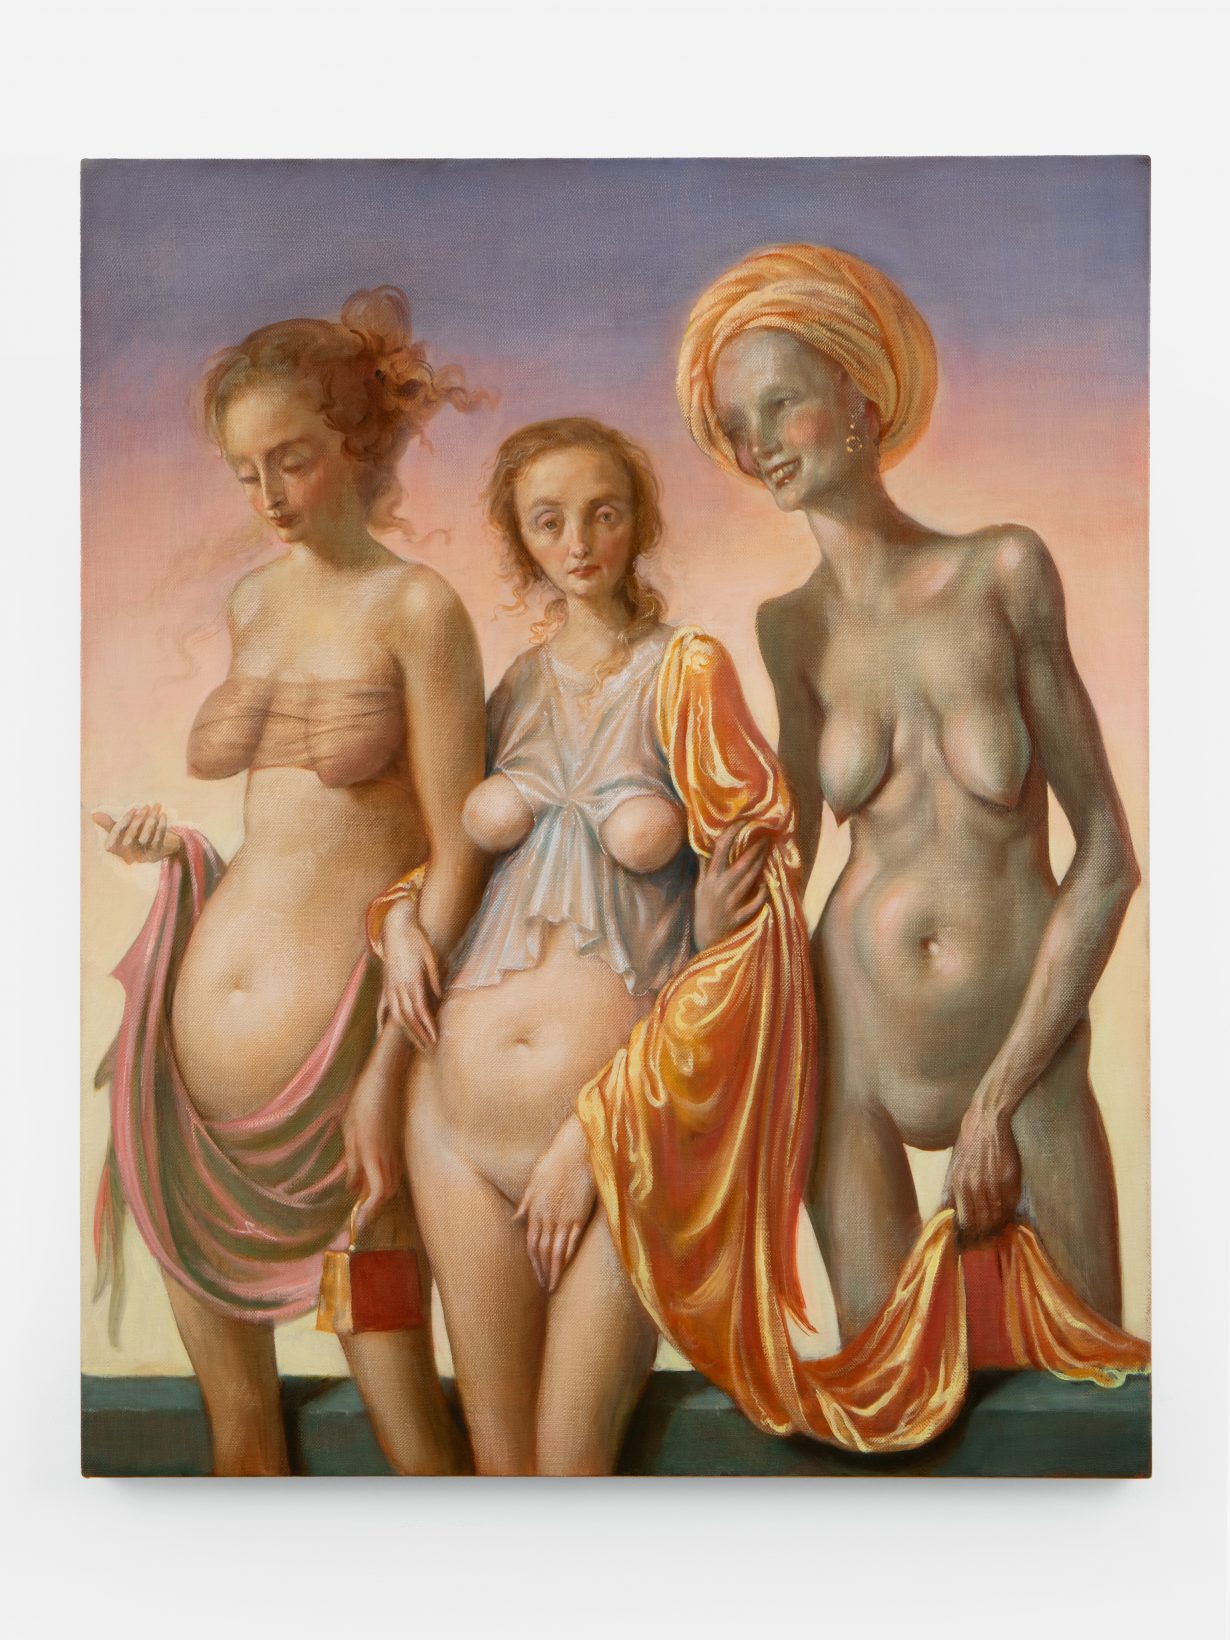 Simran Sex Vedios - John Currin's Paintings Are Disgusting and Amoral. That's Why They're So  Good - ArtReview